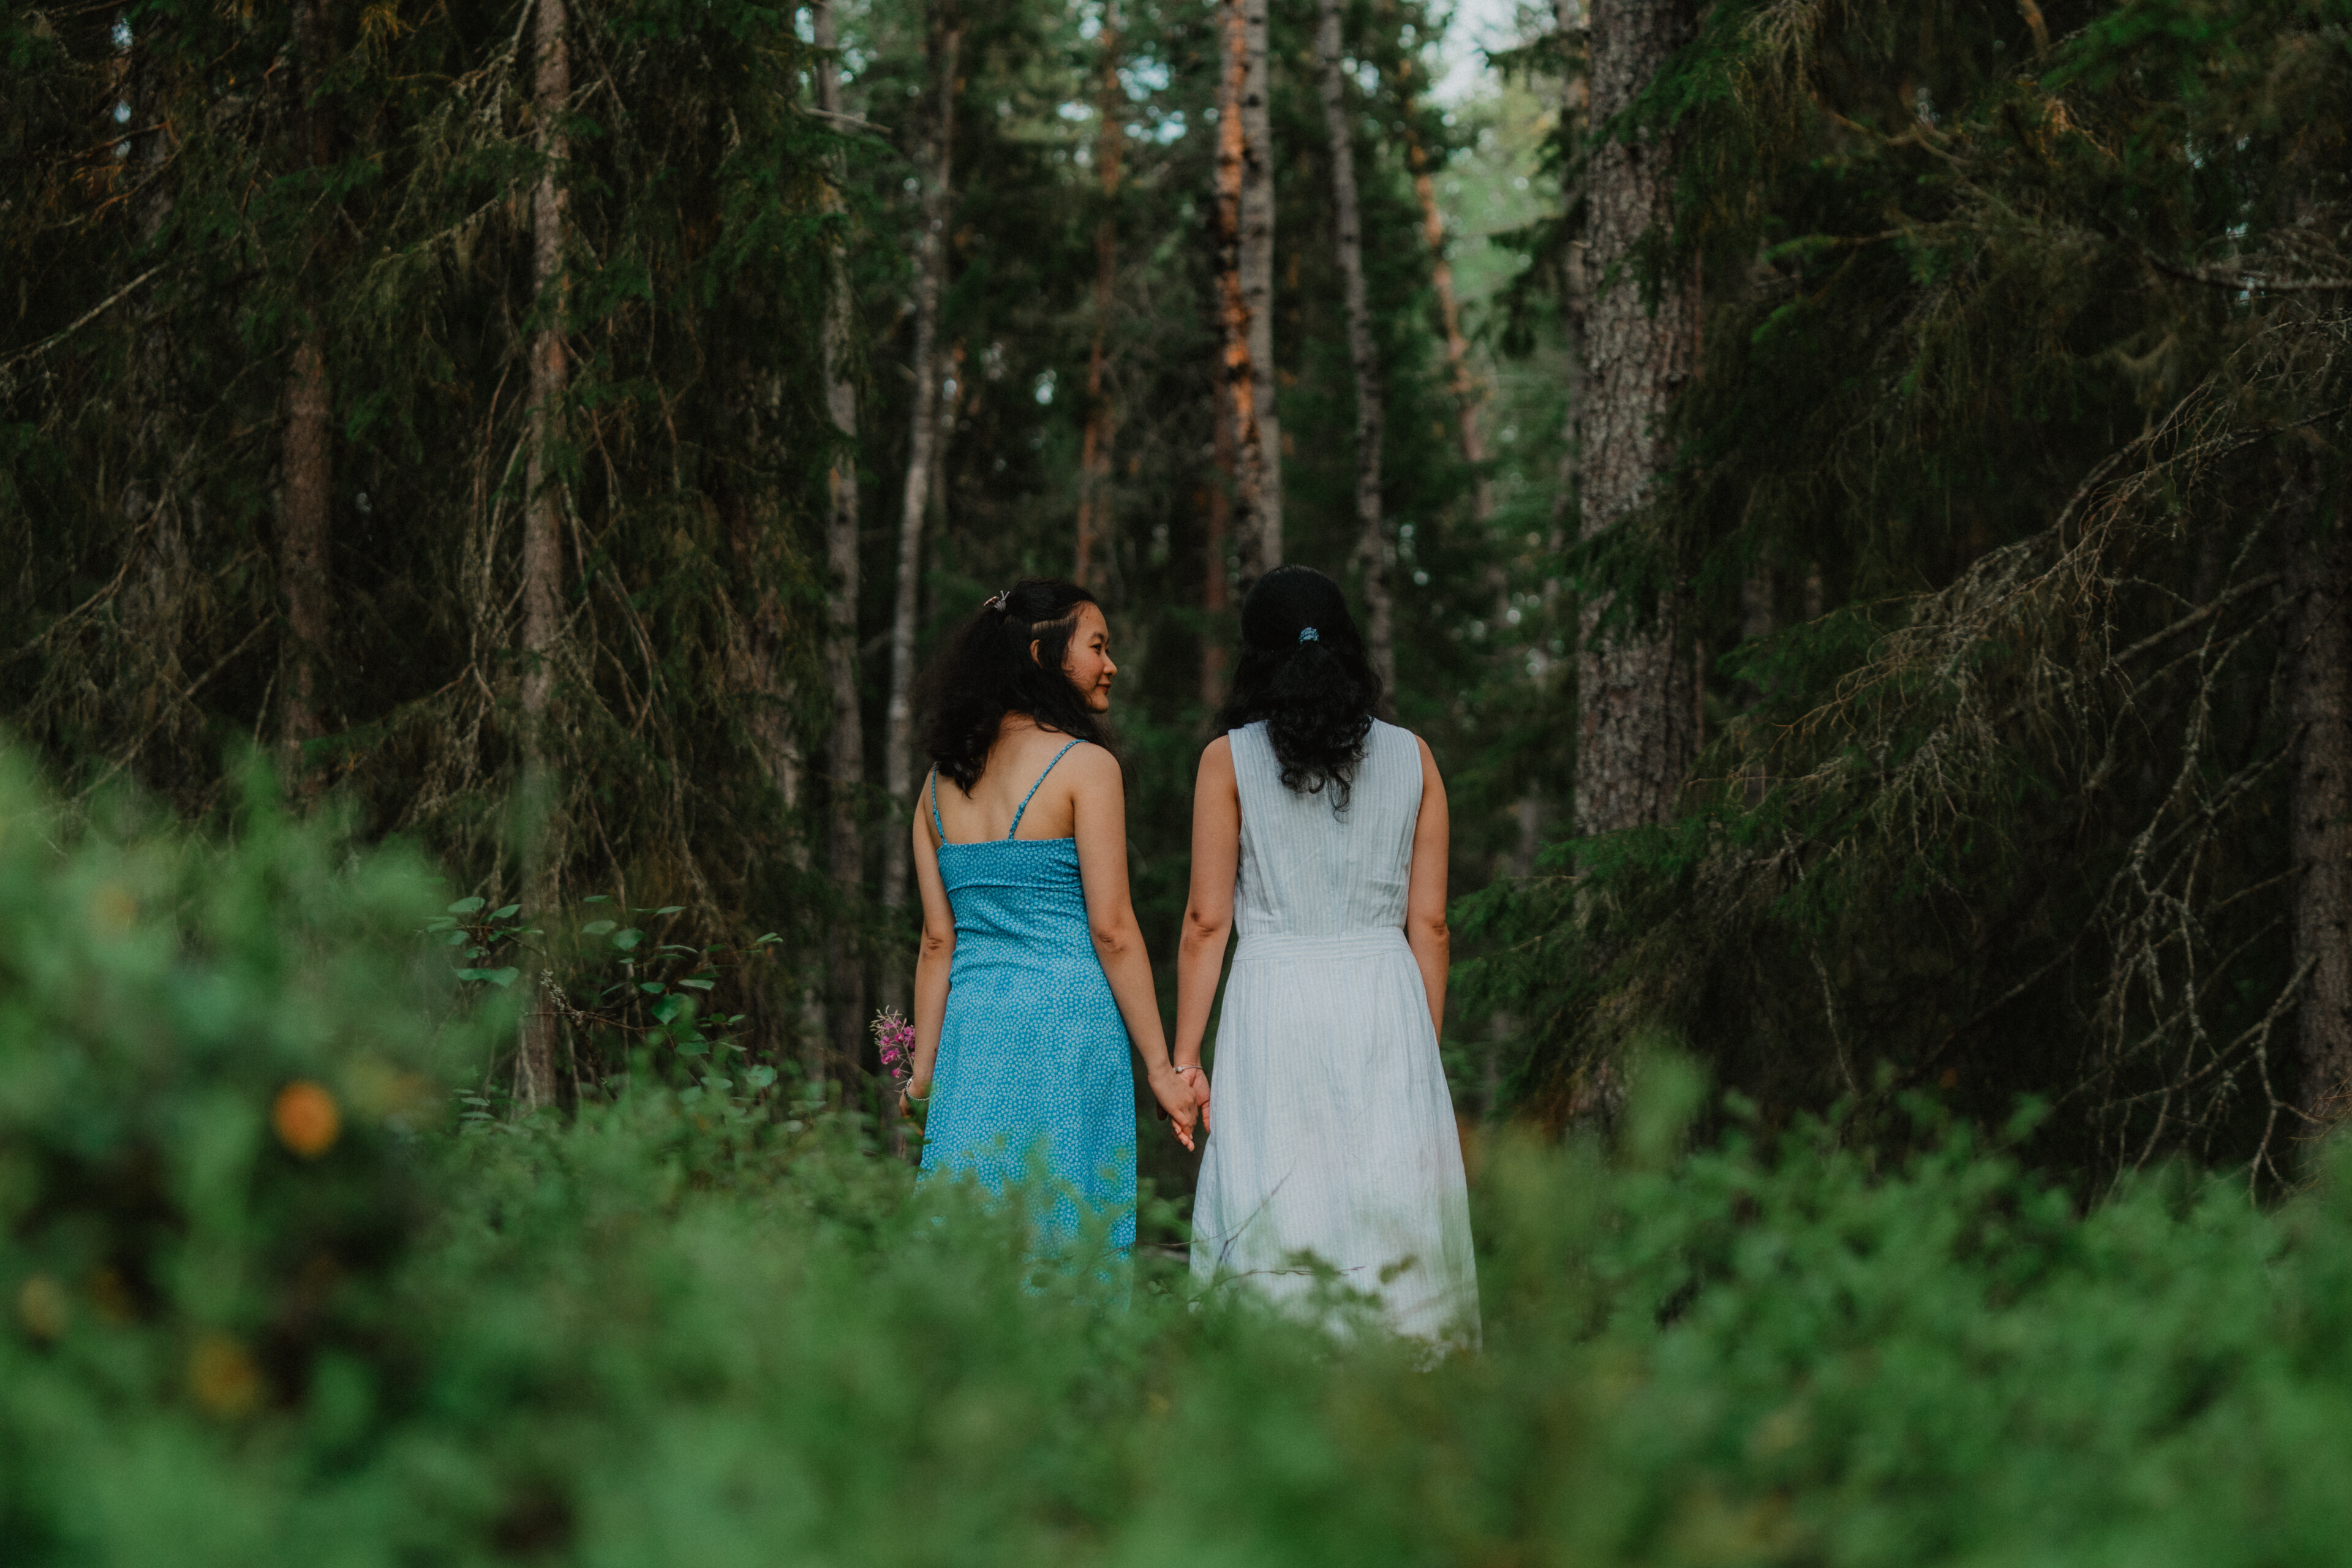 Two women walking a nature trail and holding hands in forest during summer in Rovaniemi, Lapland, Finland.